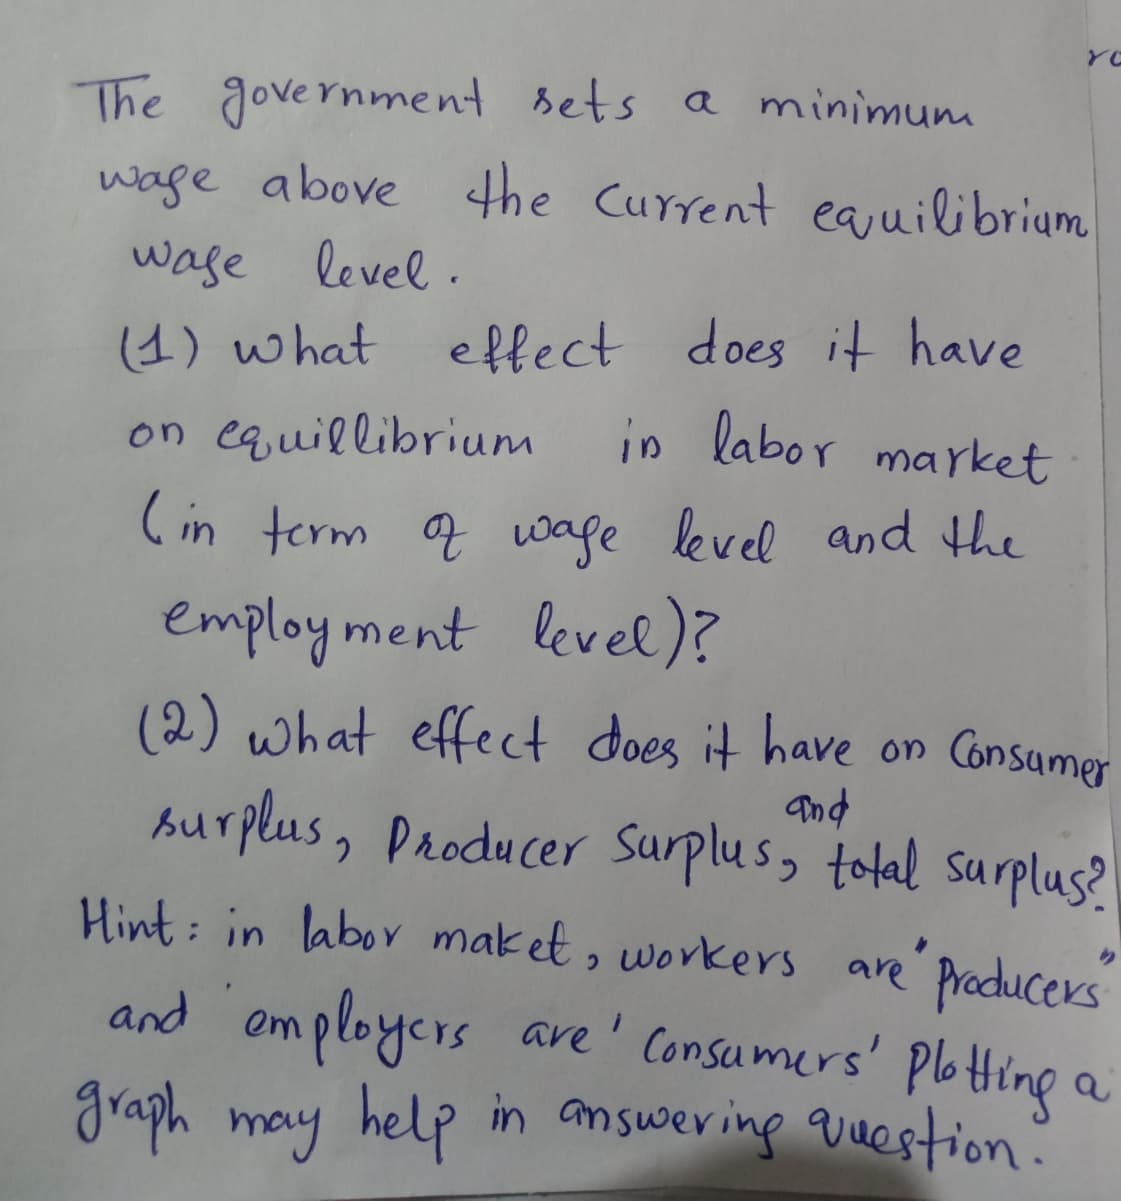 YO
The government sets a minimum
wage above the Current eauilibrium
wase level.
(4) what
on equillibrium
effect does it have
in labor market
(in term a wage level and he
employ ment levele)?
(2) what effect does it have on Consumer
burplus, Producer Surplus, tolal surplus?
and
Hint: in labor maket, workers are Praducers
C.
and omployers ave' Consumers' PbHing a
graph may help in answering question?
